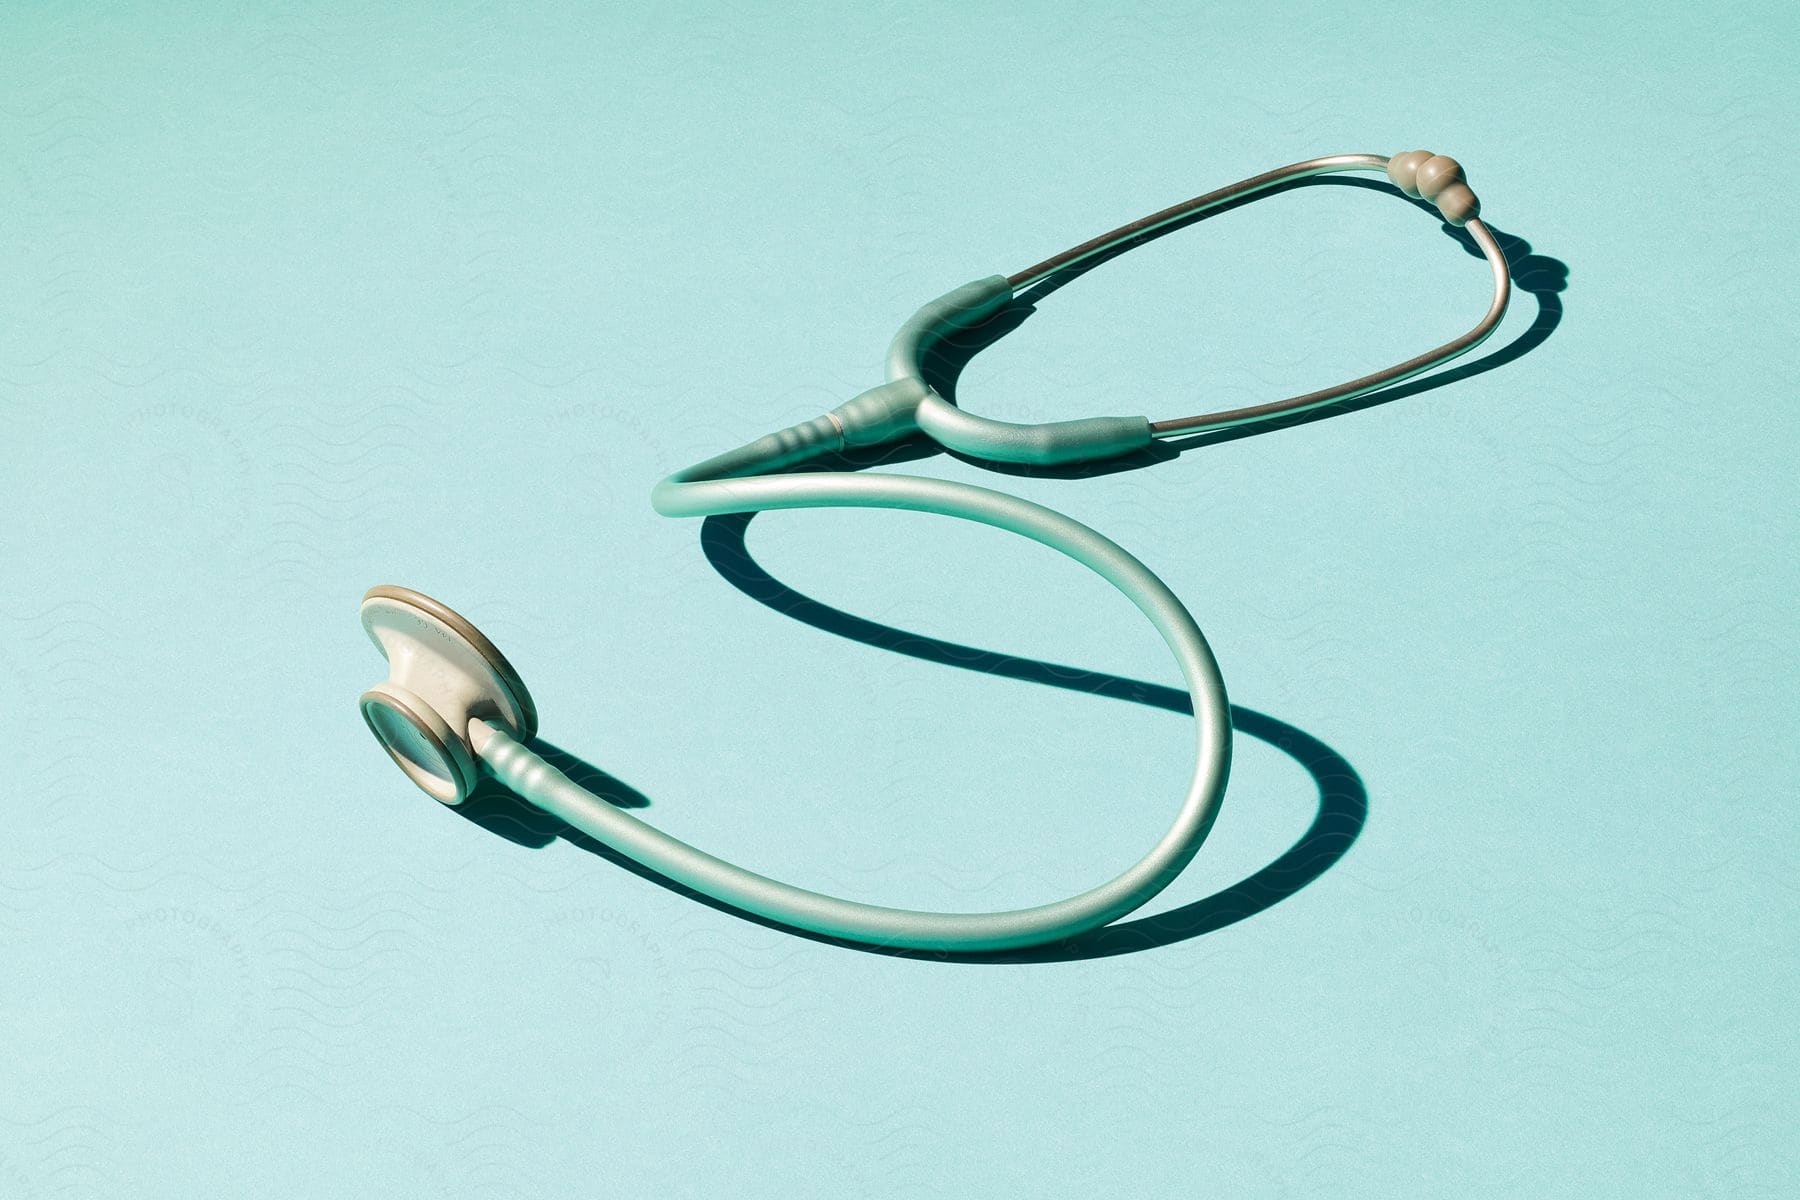 A stethoscope on a teal surface